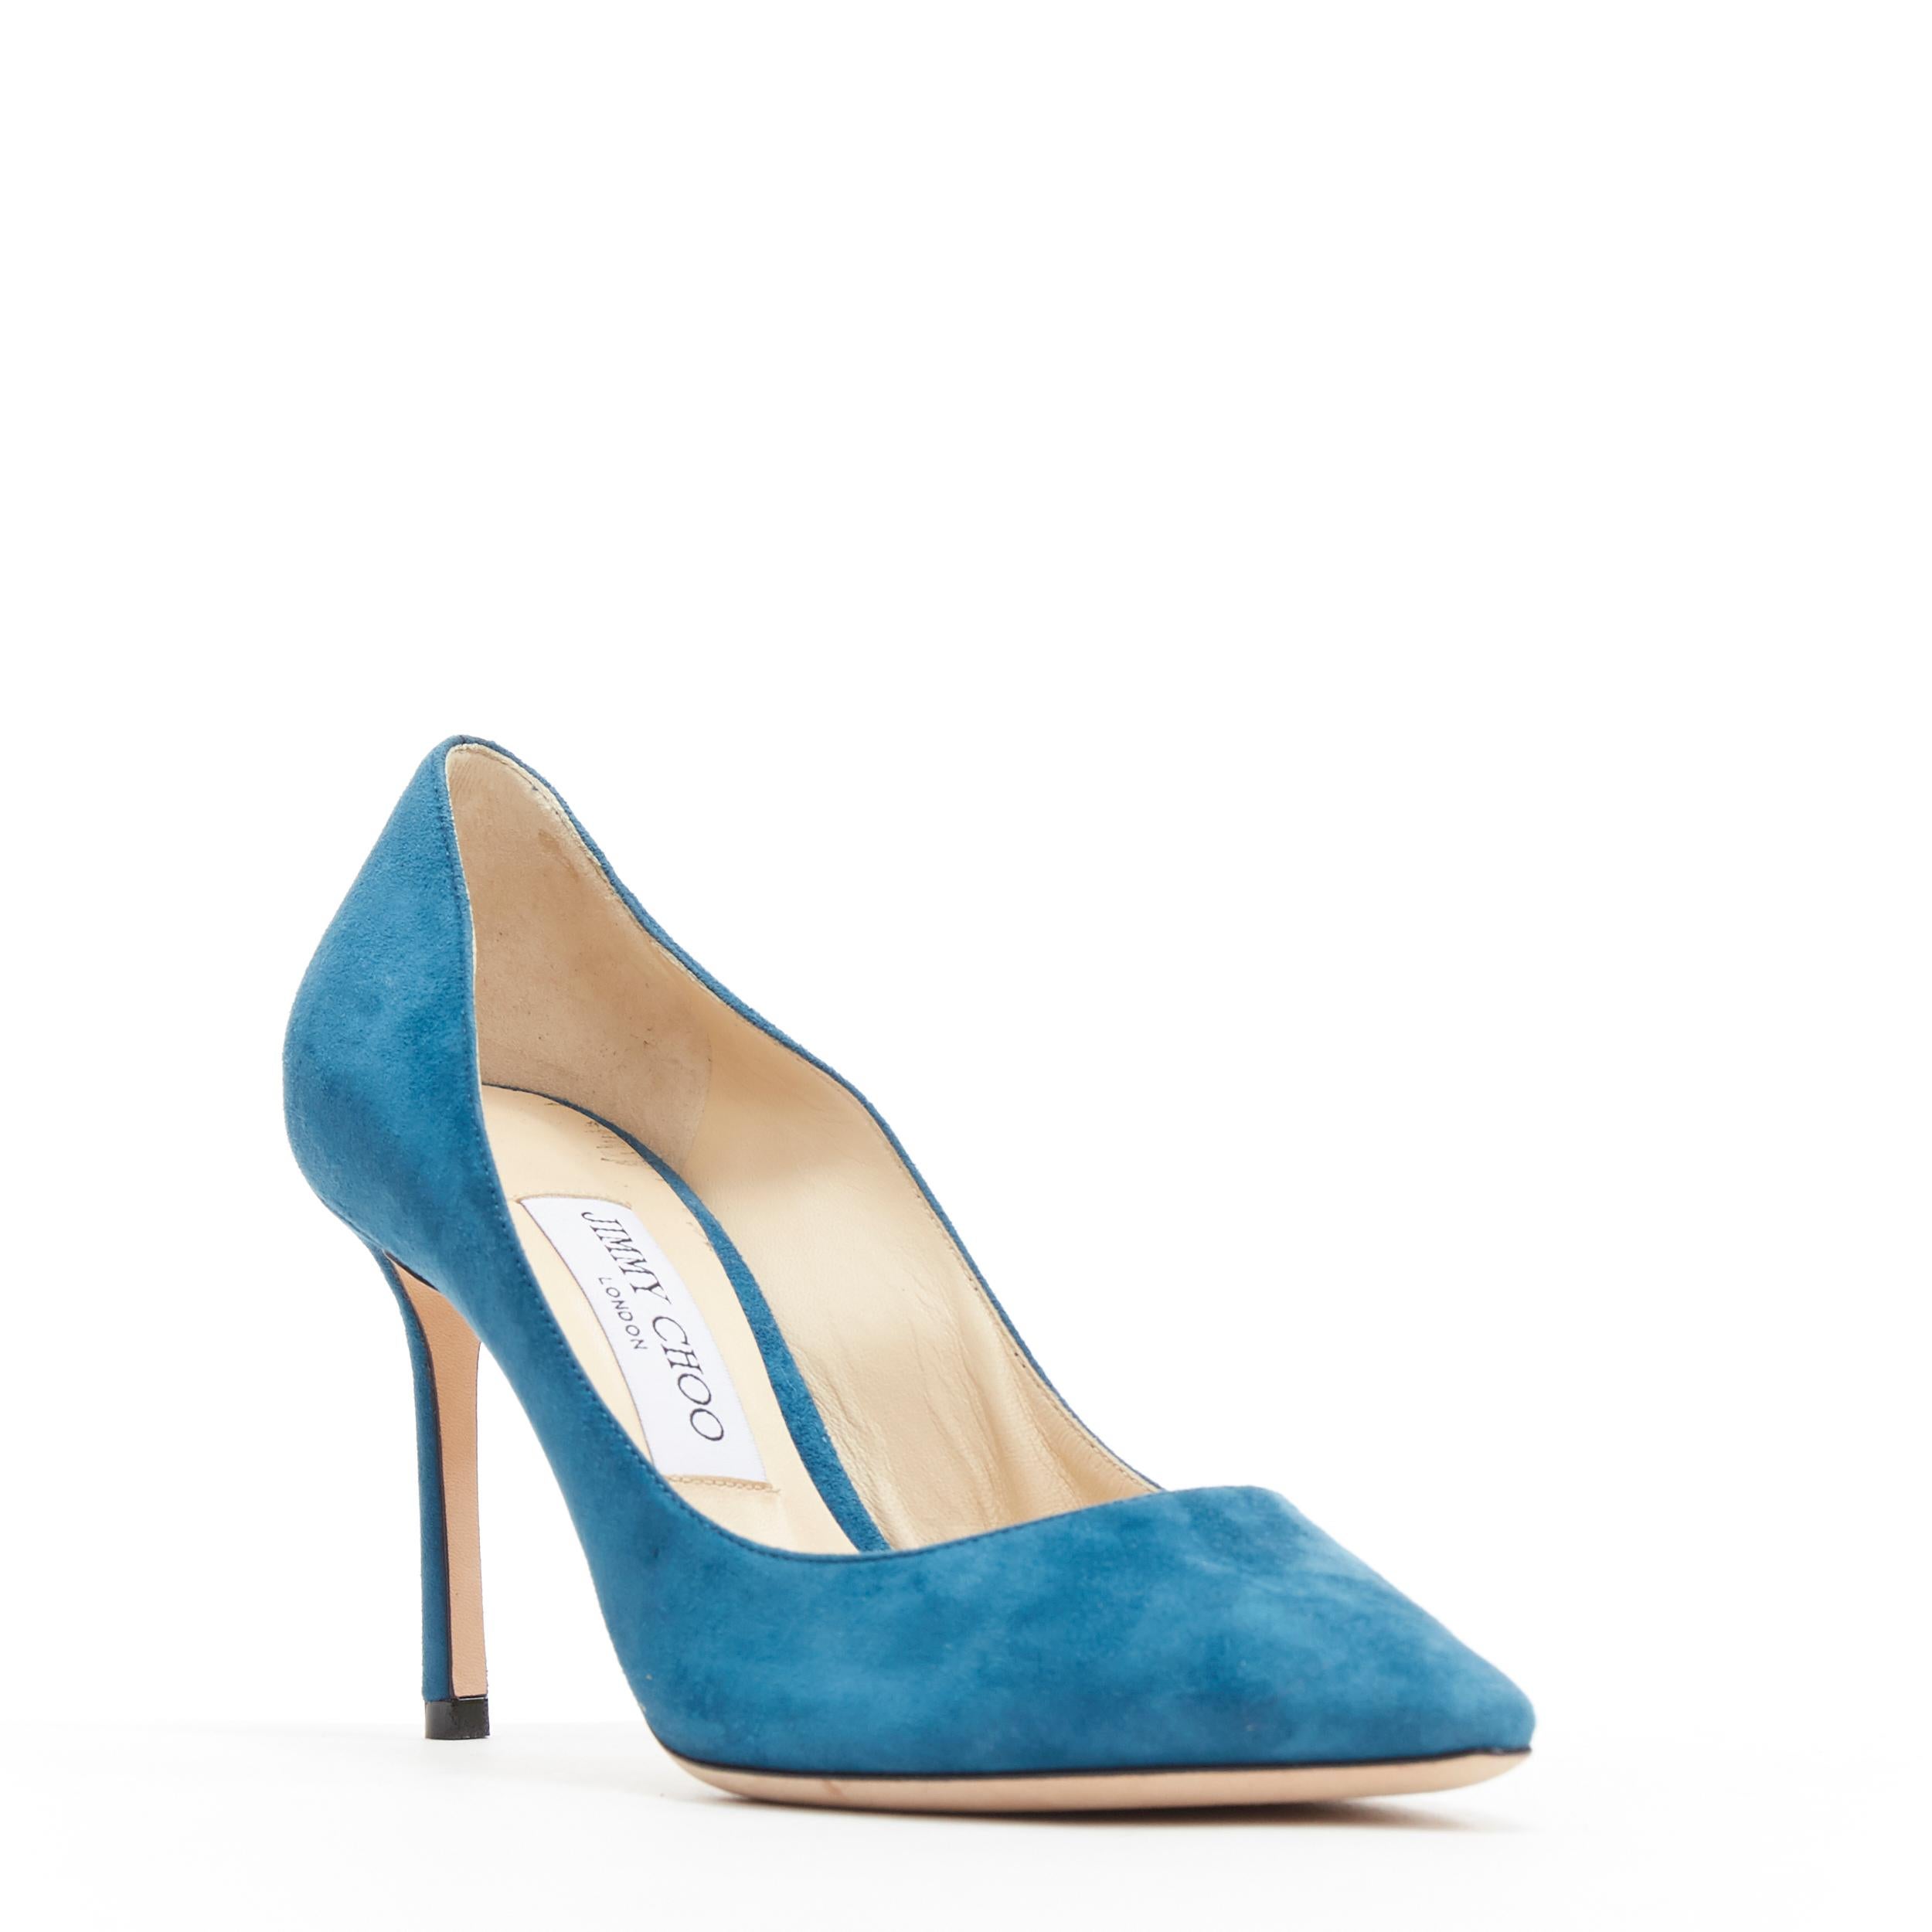 JIMMY CHOO Romy 85 teal blue suede leather point toe pigalle pump EU37
Brand: Jimmy Choo
Model Name / Style: Romy 85
Material: Suede
Color: Blue
Pattern: Solid
Extra Detail: High (3-3.9 in) heel height. Pointed toe. Slim heel.
Made in: